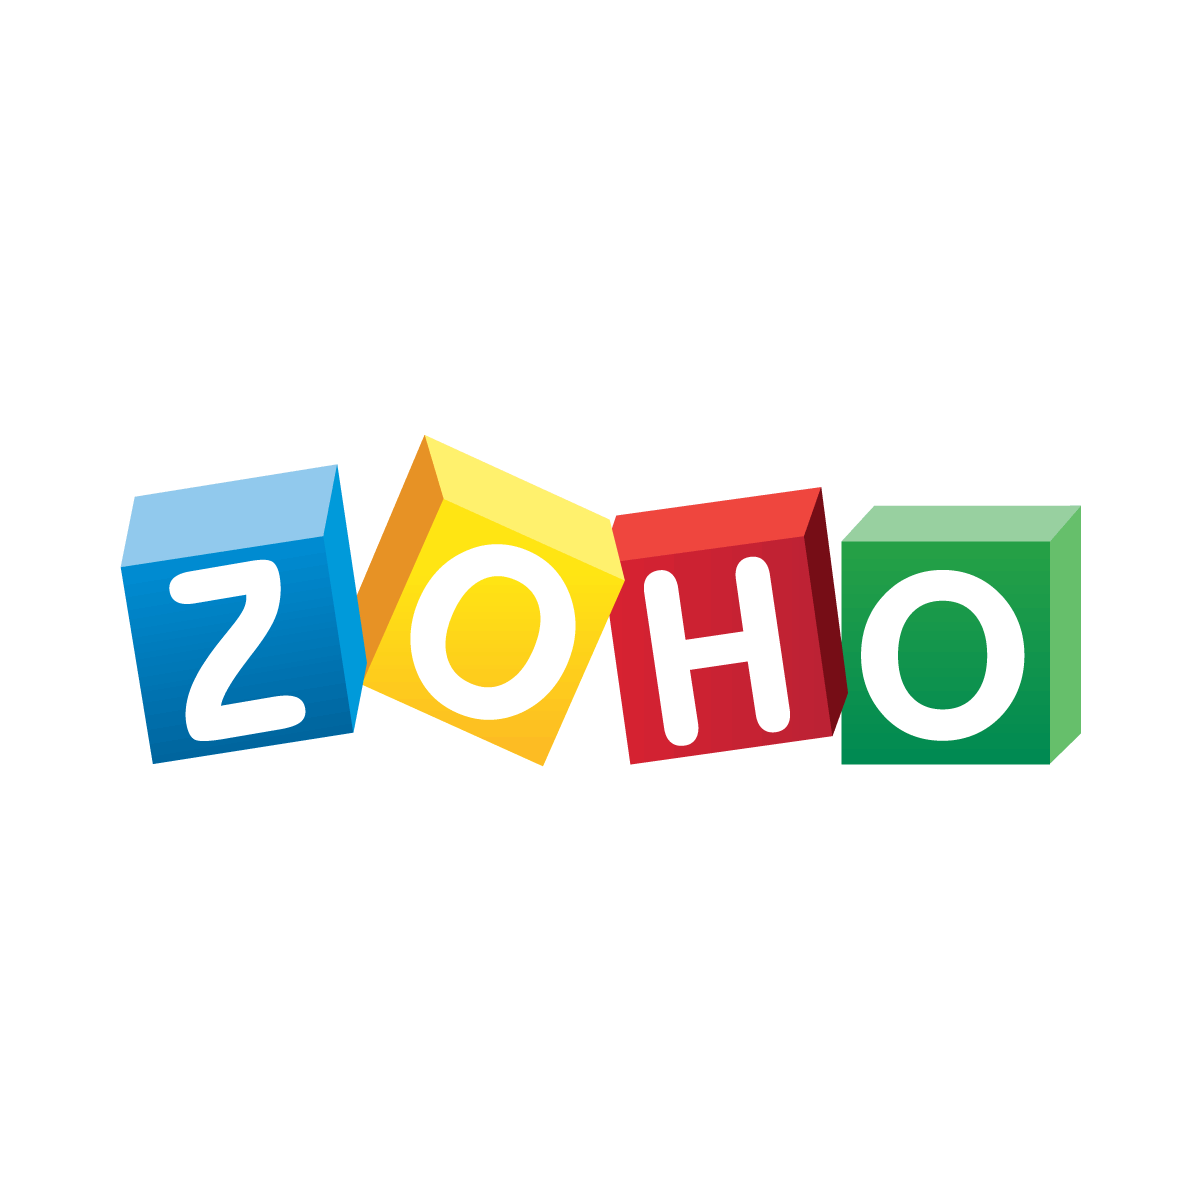 New Version of Zoho Sites Helps Users Build Beautiful, Modular Websites with Advanced Customization Options